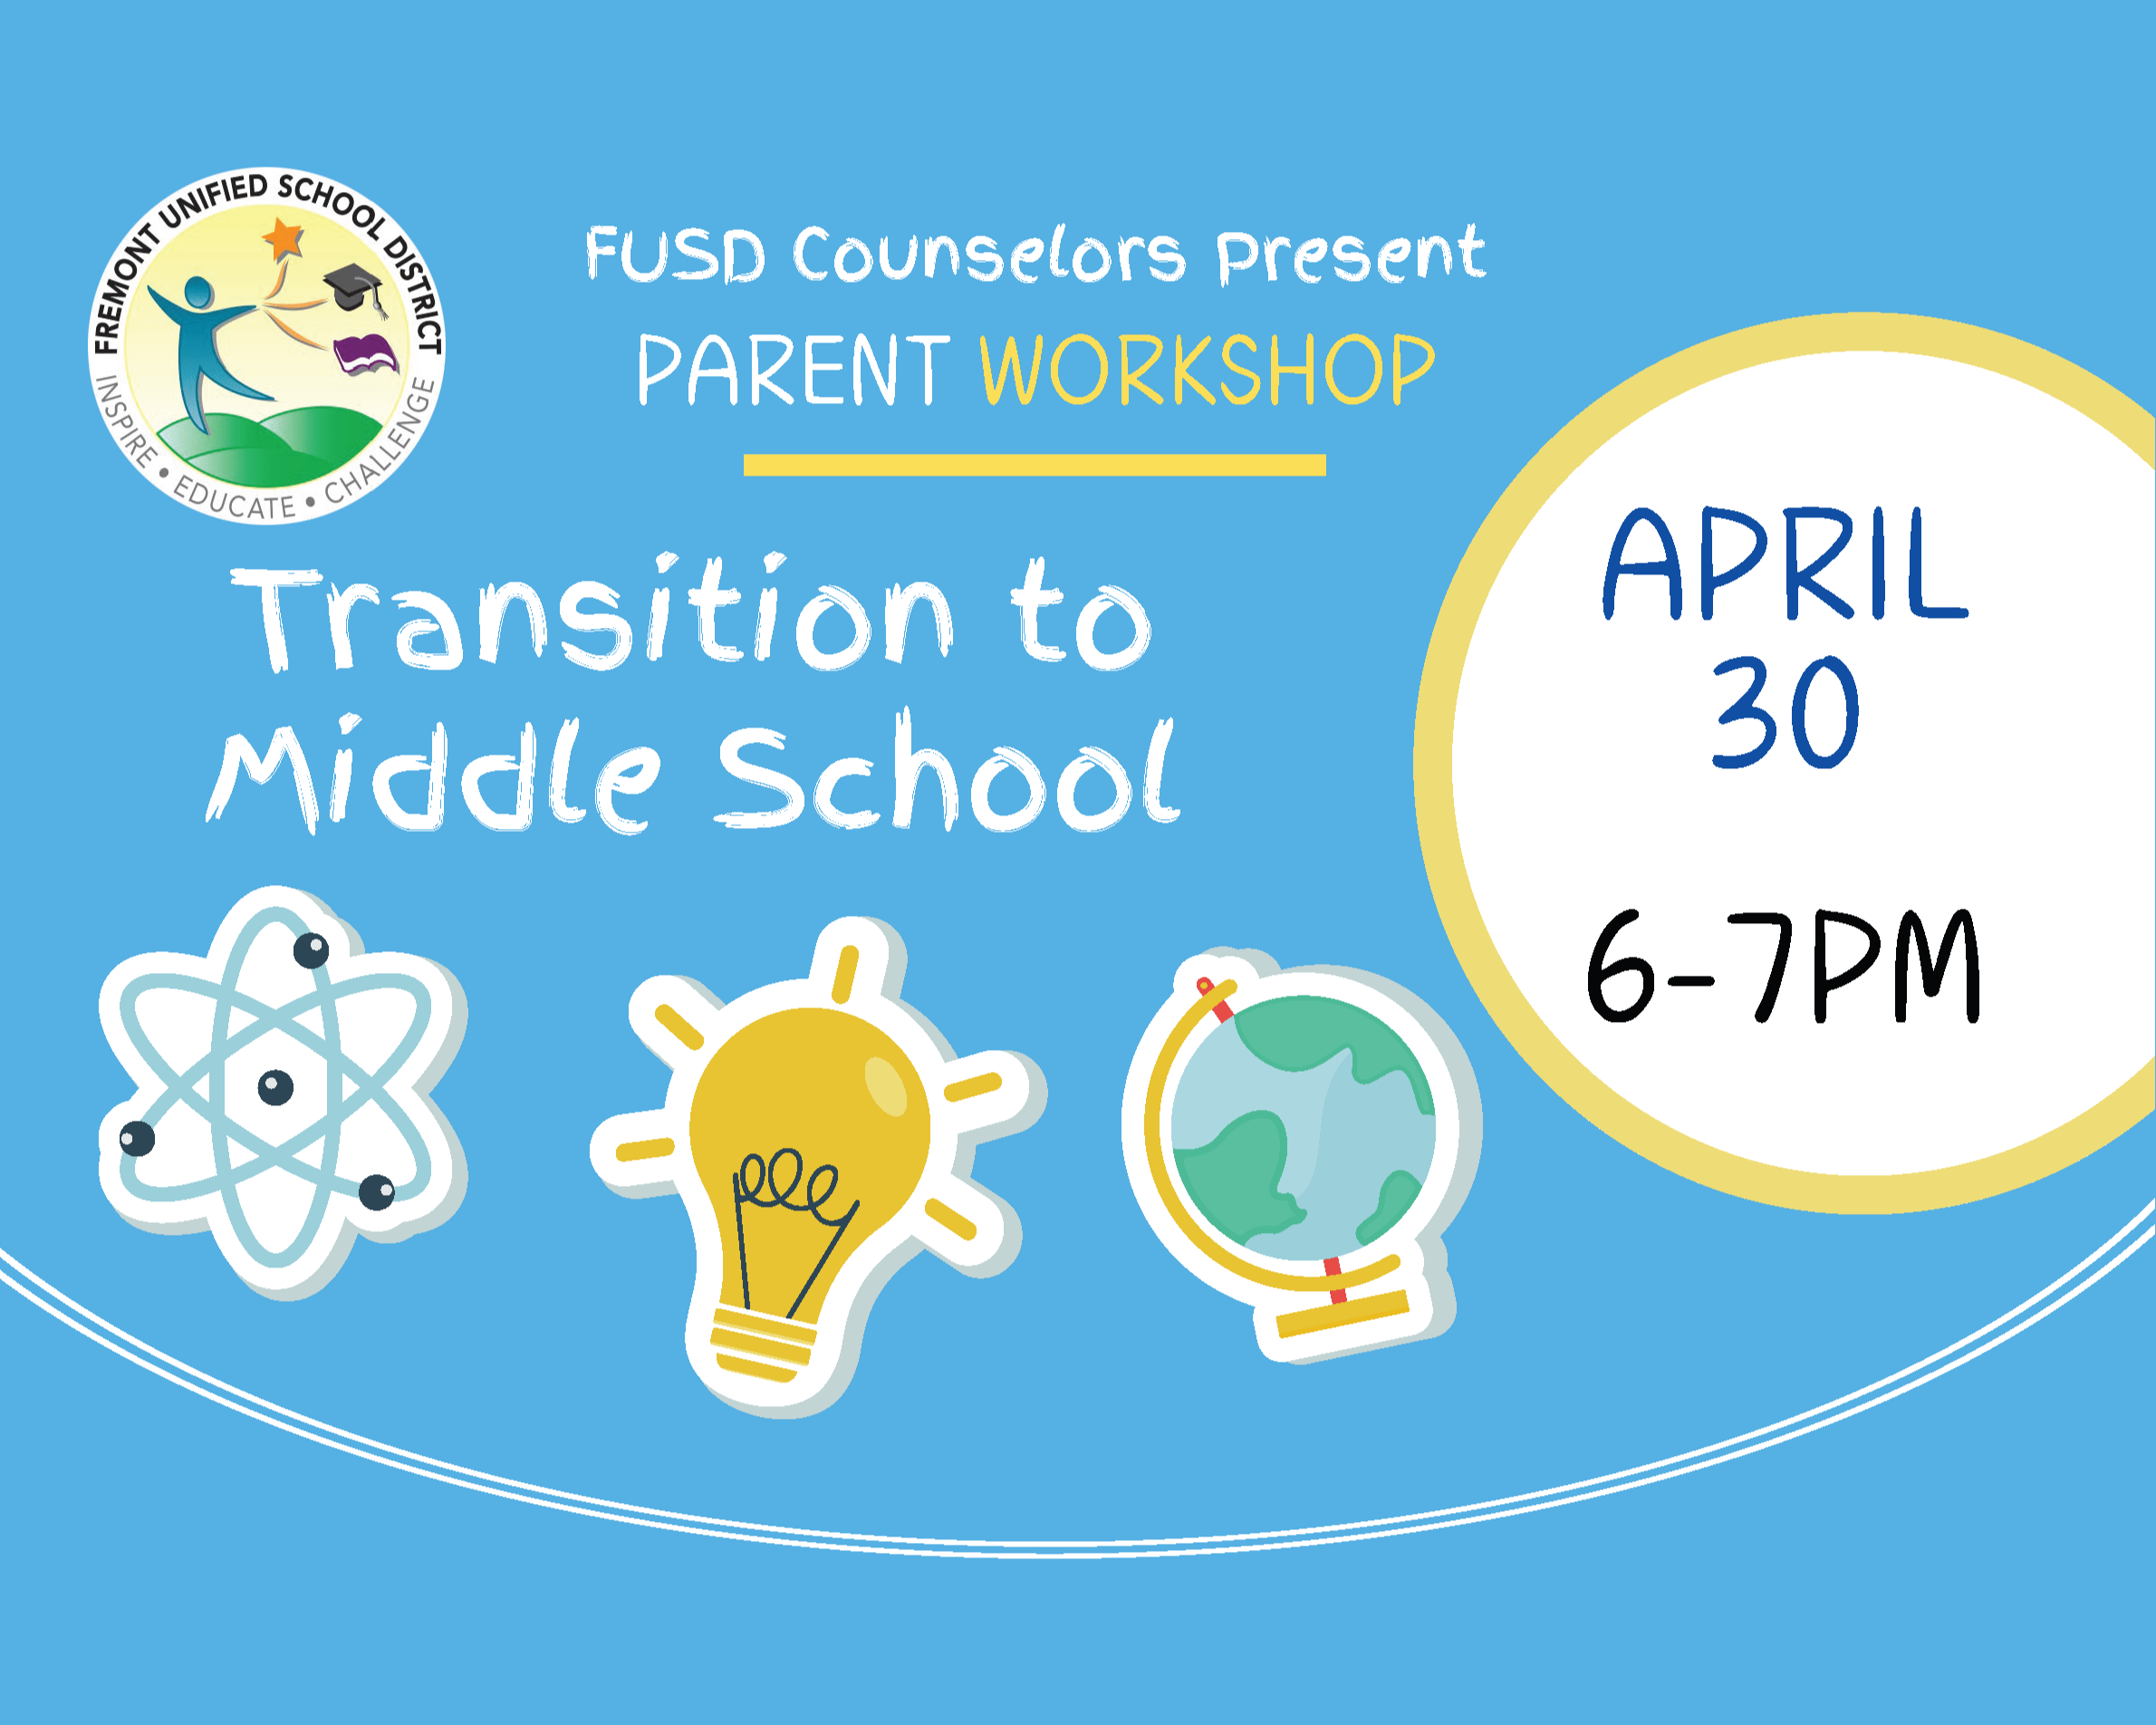 Transition to Middle School Workshop